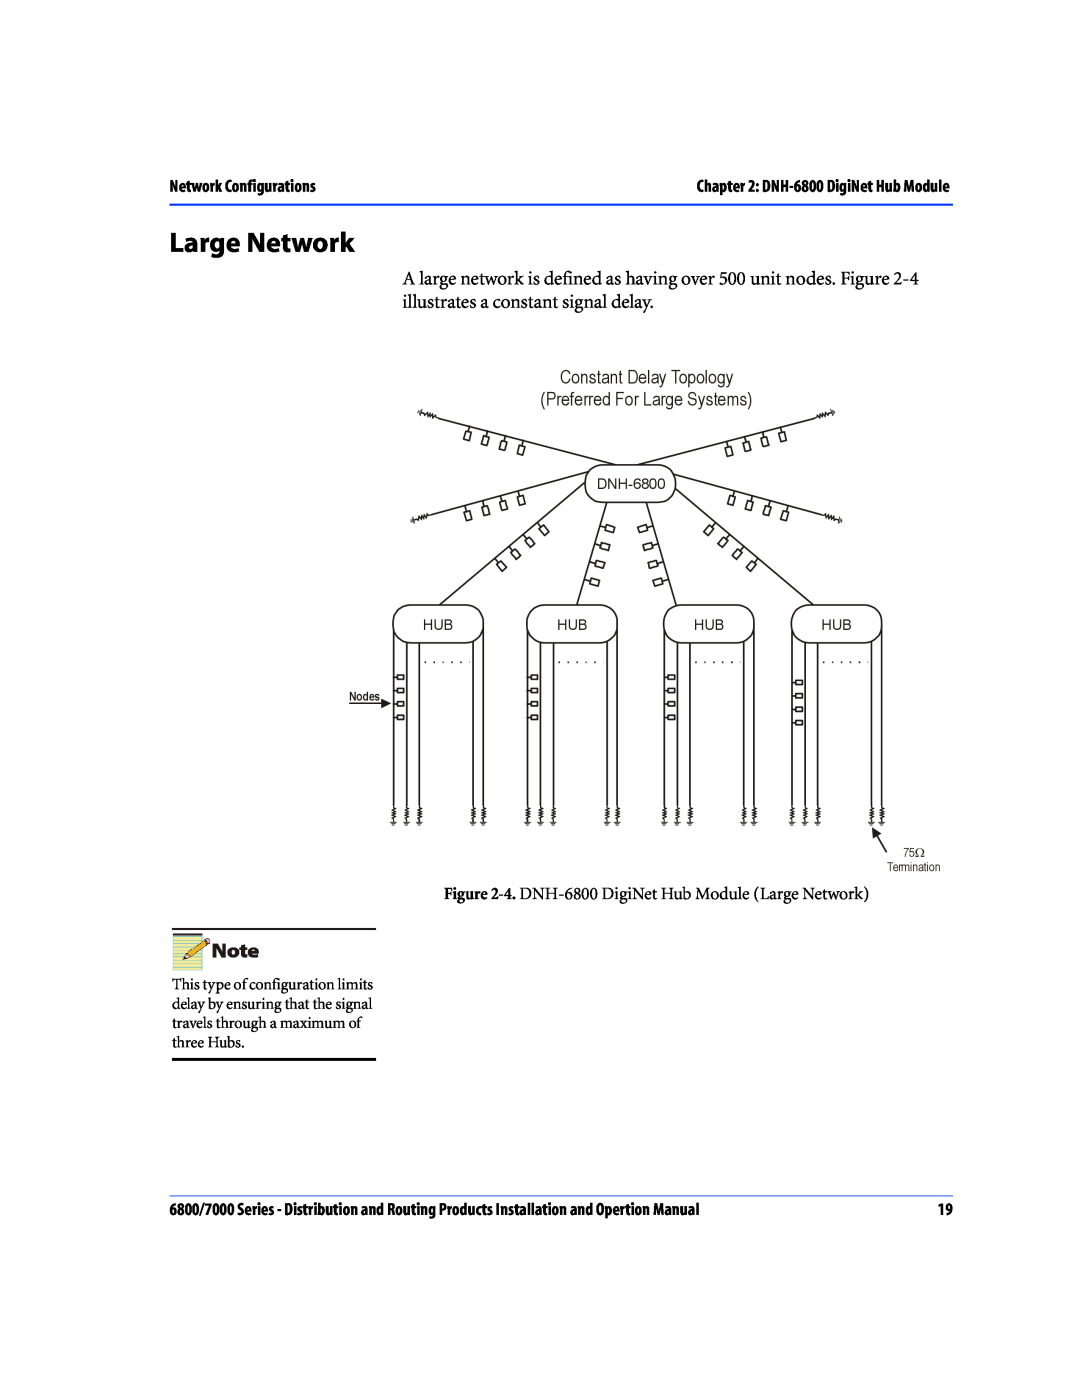 Nokia 6800 Series Large Network, Constant Delay Topology Preferred For Large Systems, Network Configurations, DNH-6800 